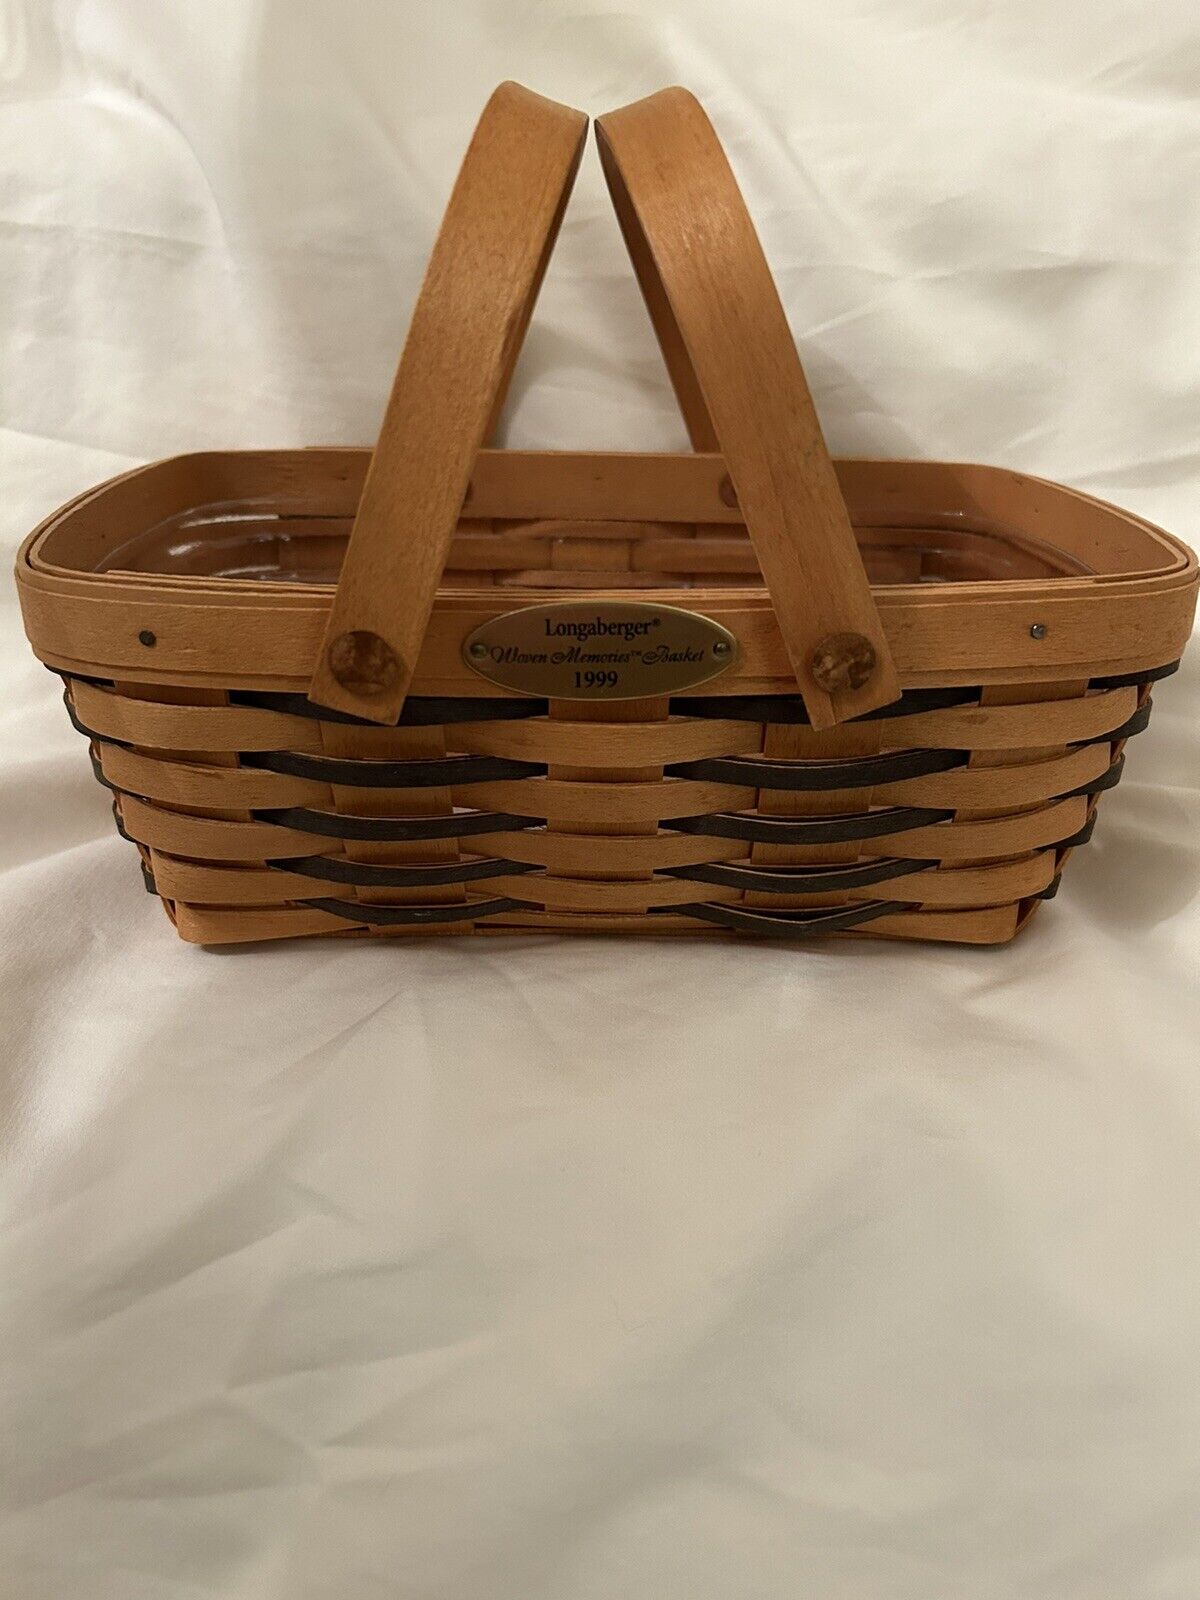 RARE Retired 1999 Longaberger Woven Memories Basket with Blue Weave